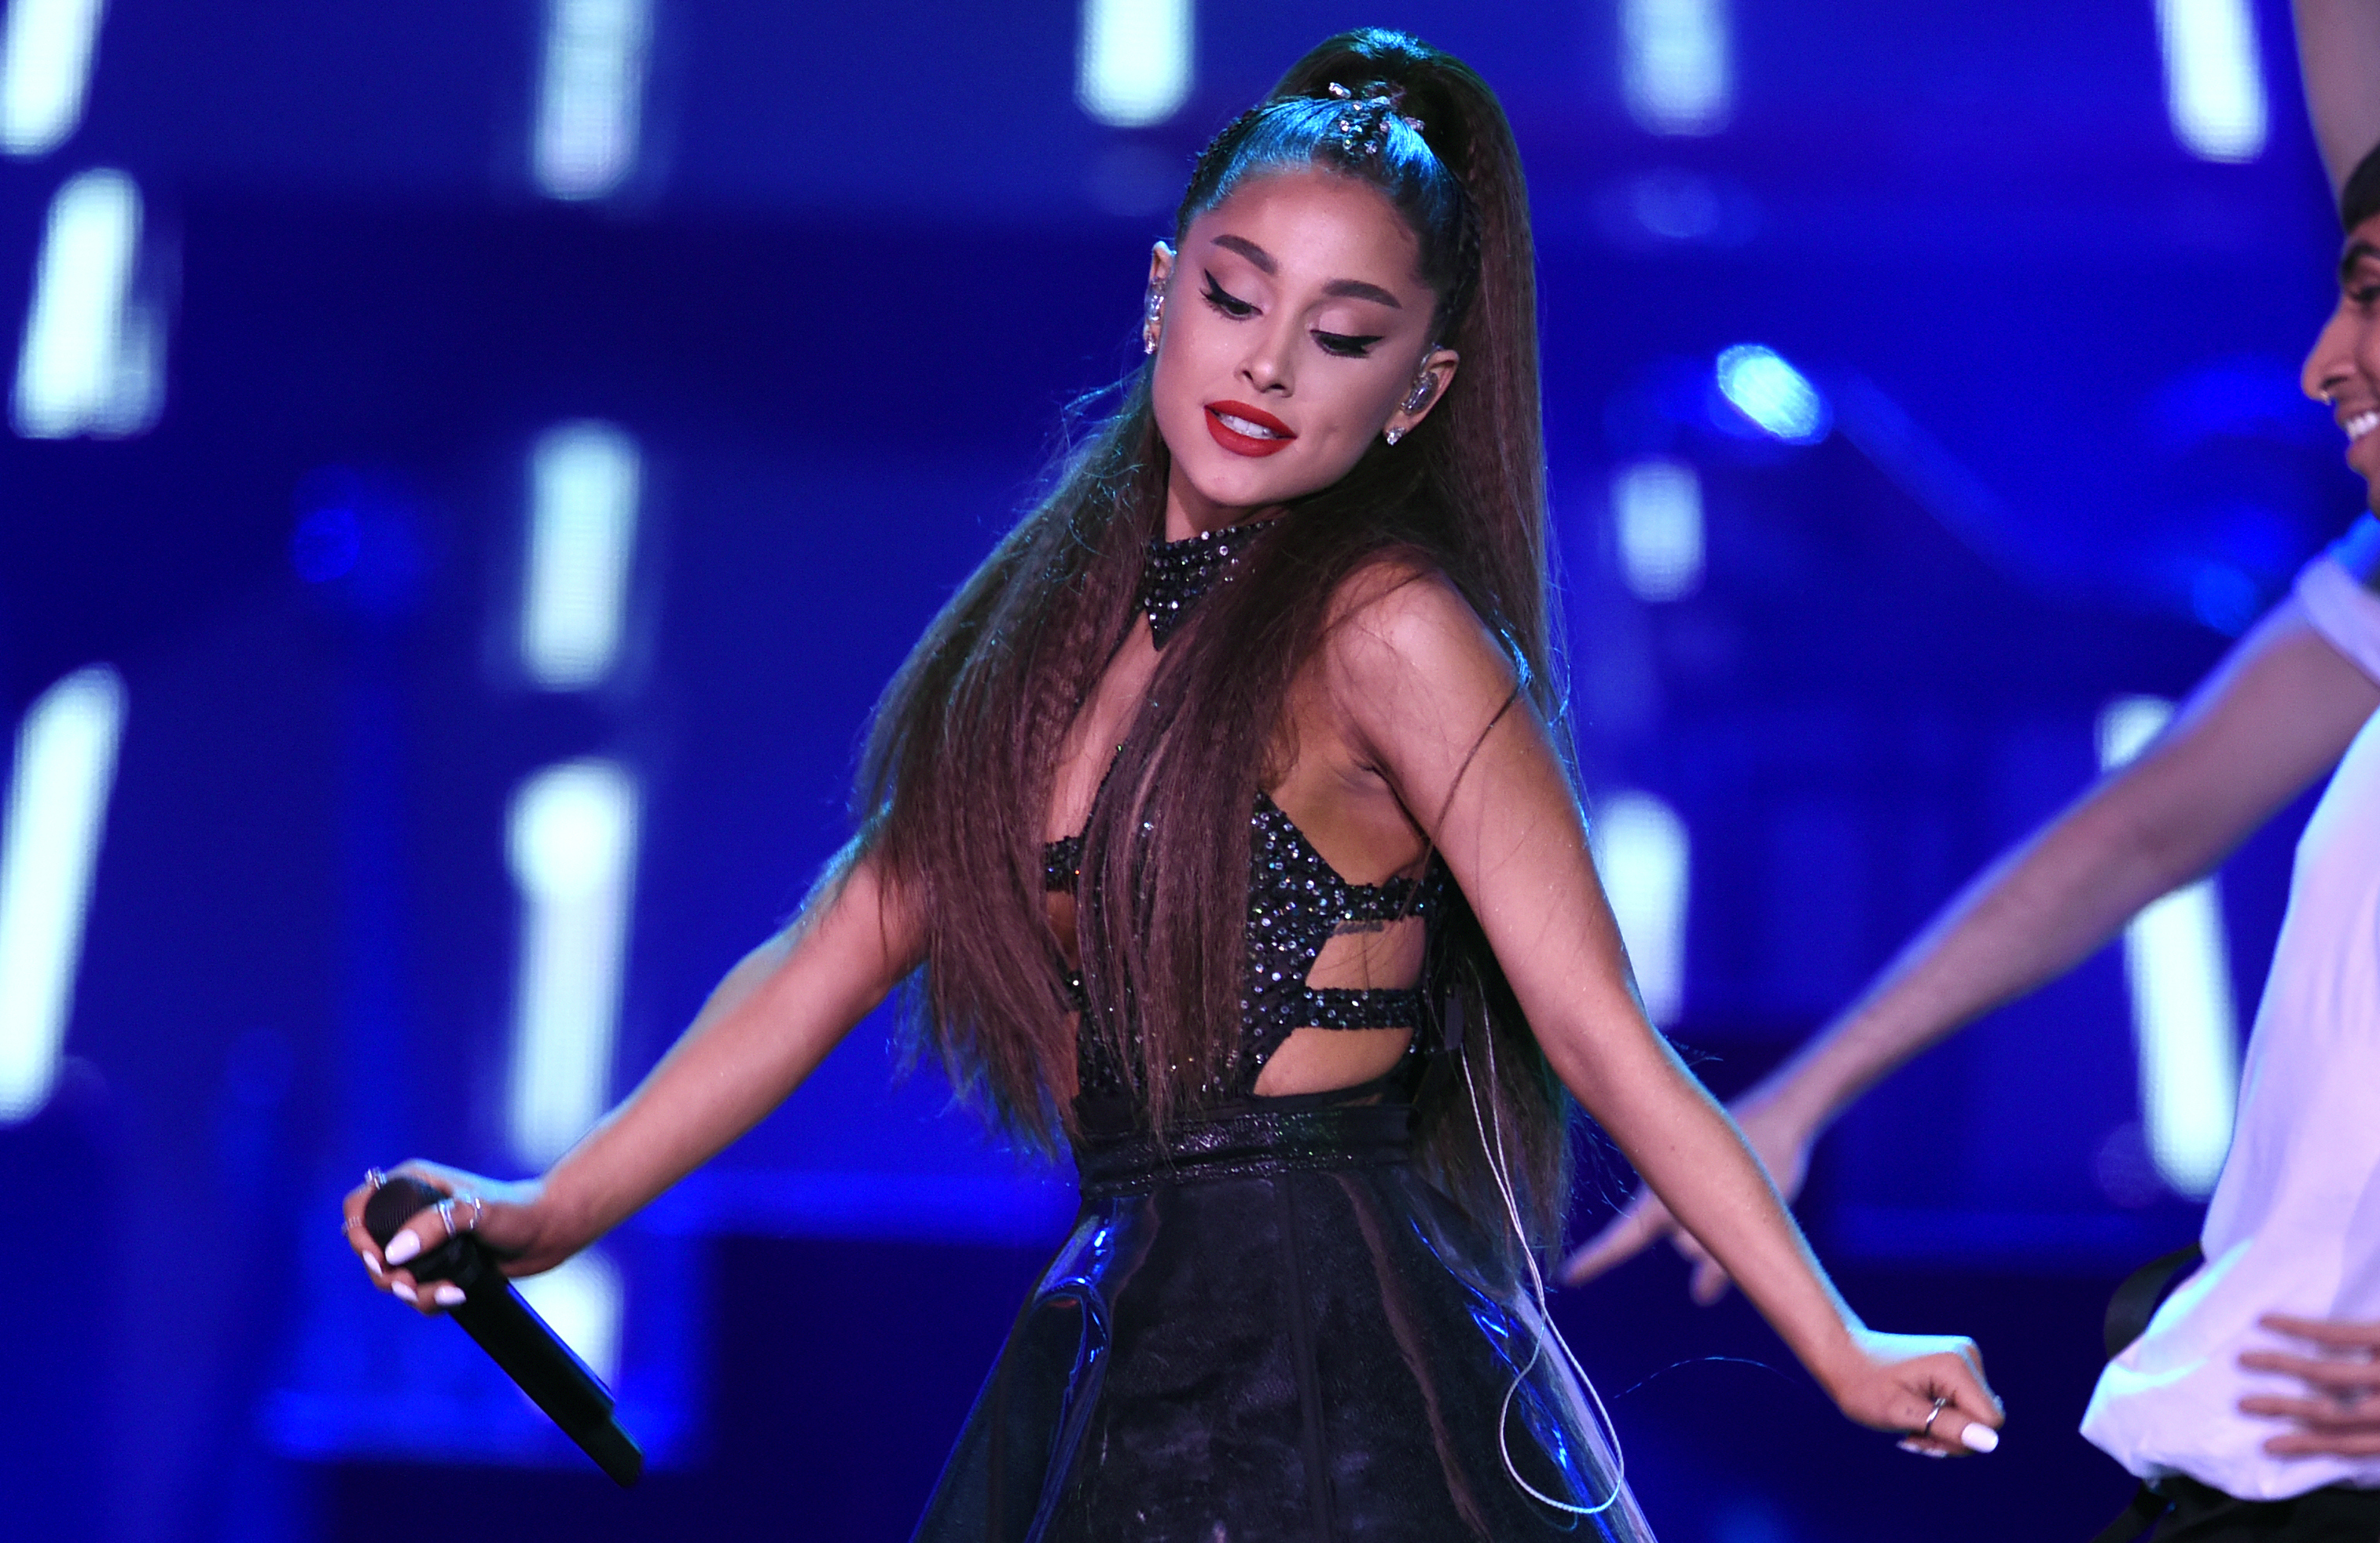 Ariana Grande concert at Fiserv Forum: Clear-bag rule, requirements